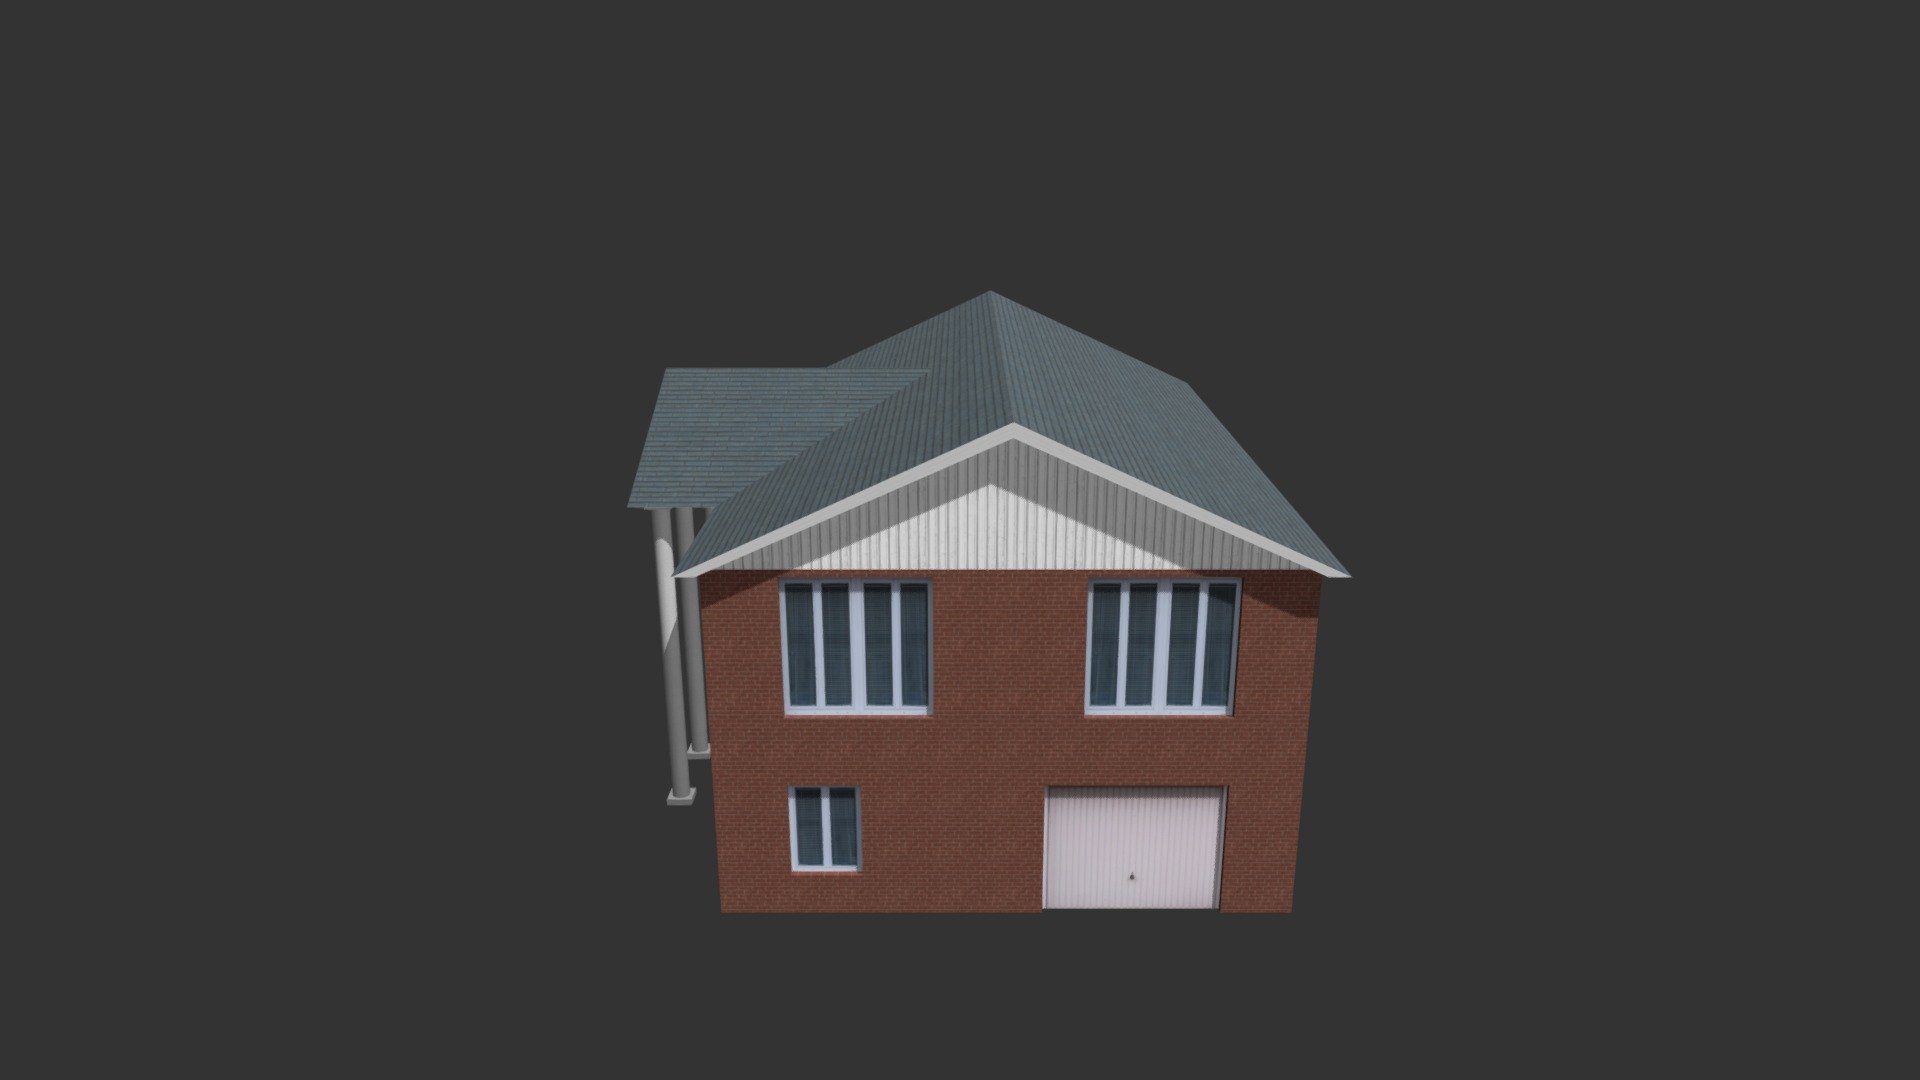 House 08

A low-poly 3d model ready for Virtual Reality (VR), Augmented Reality (AR), games and other real-time apps.

This model is based on a real life building and uses 714 triangles (401 polygons) and 6 materials.

Scaled to a default scale of 1 unit = 1 meter

This set comes with :

Model files in 3DS format files (.3ds) 
Model files in FBX format files (.fbx) 
Model files in OBJ format files (.obj &amp; .mtl) 

Textures : 
Diffuse Maps 
Normal Maps

All Textures are preloaded on the materials and prefabs so this prop is ready to be dropped in to any of your scenes.

Optimised for game engines but can also be used in any 3d package 3d model